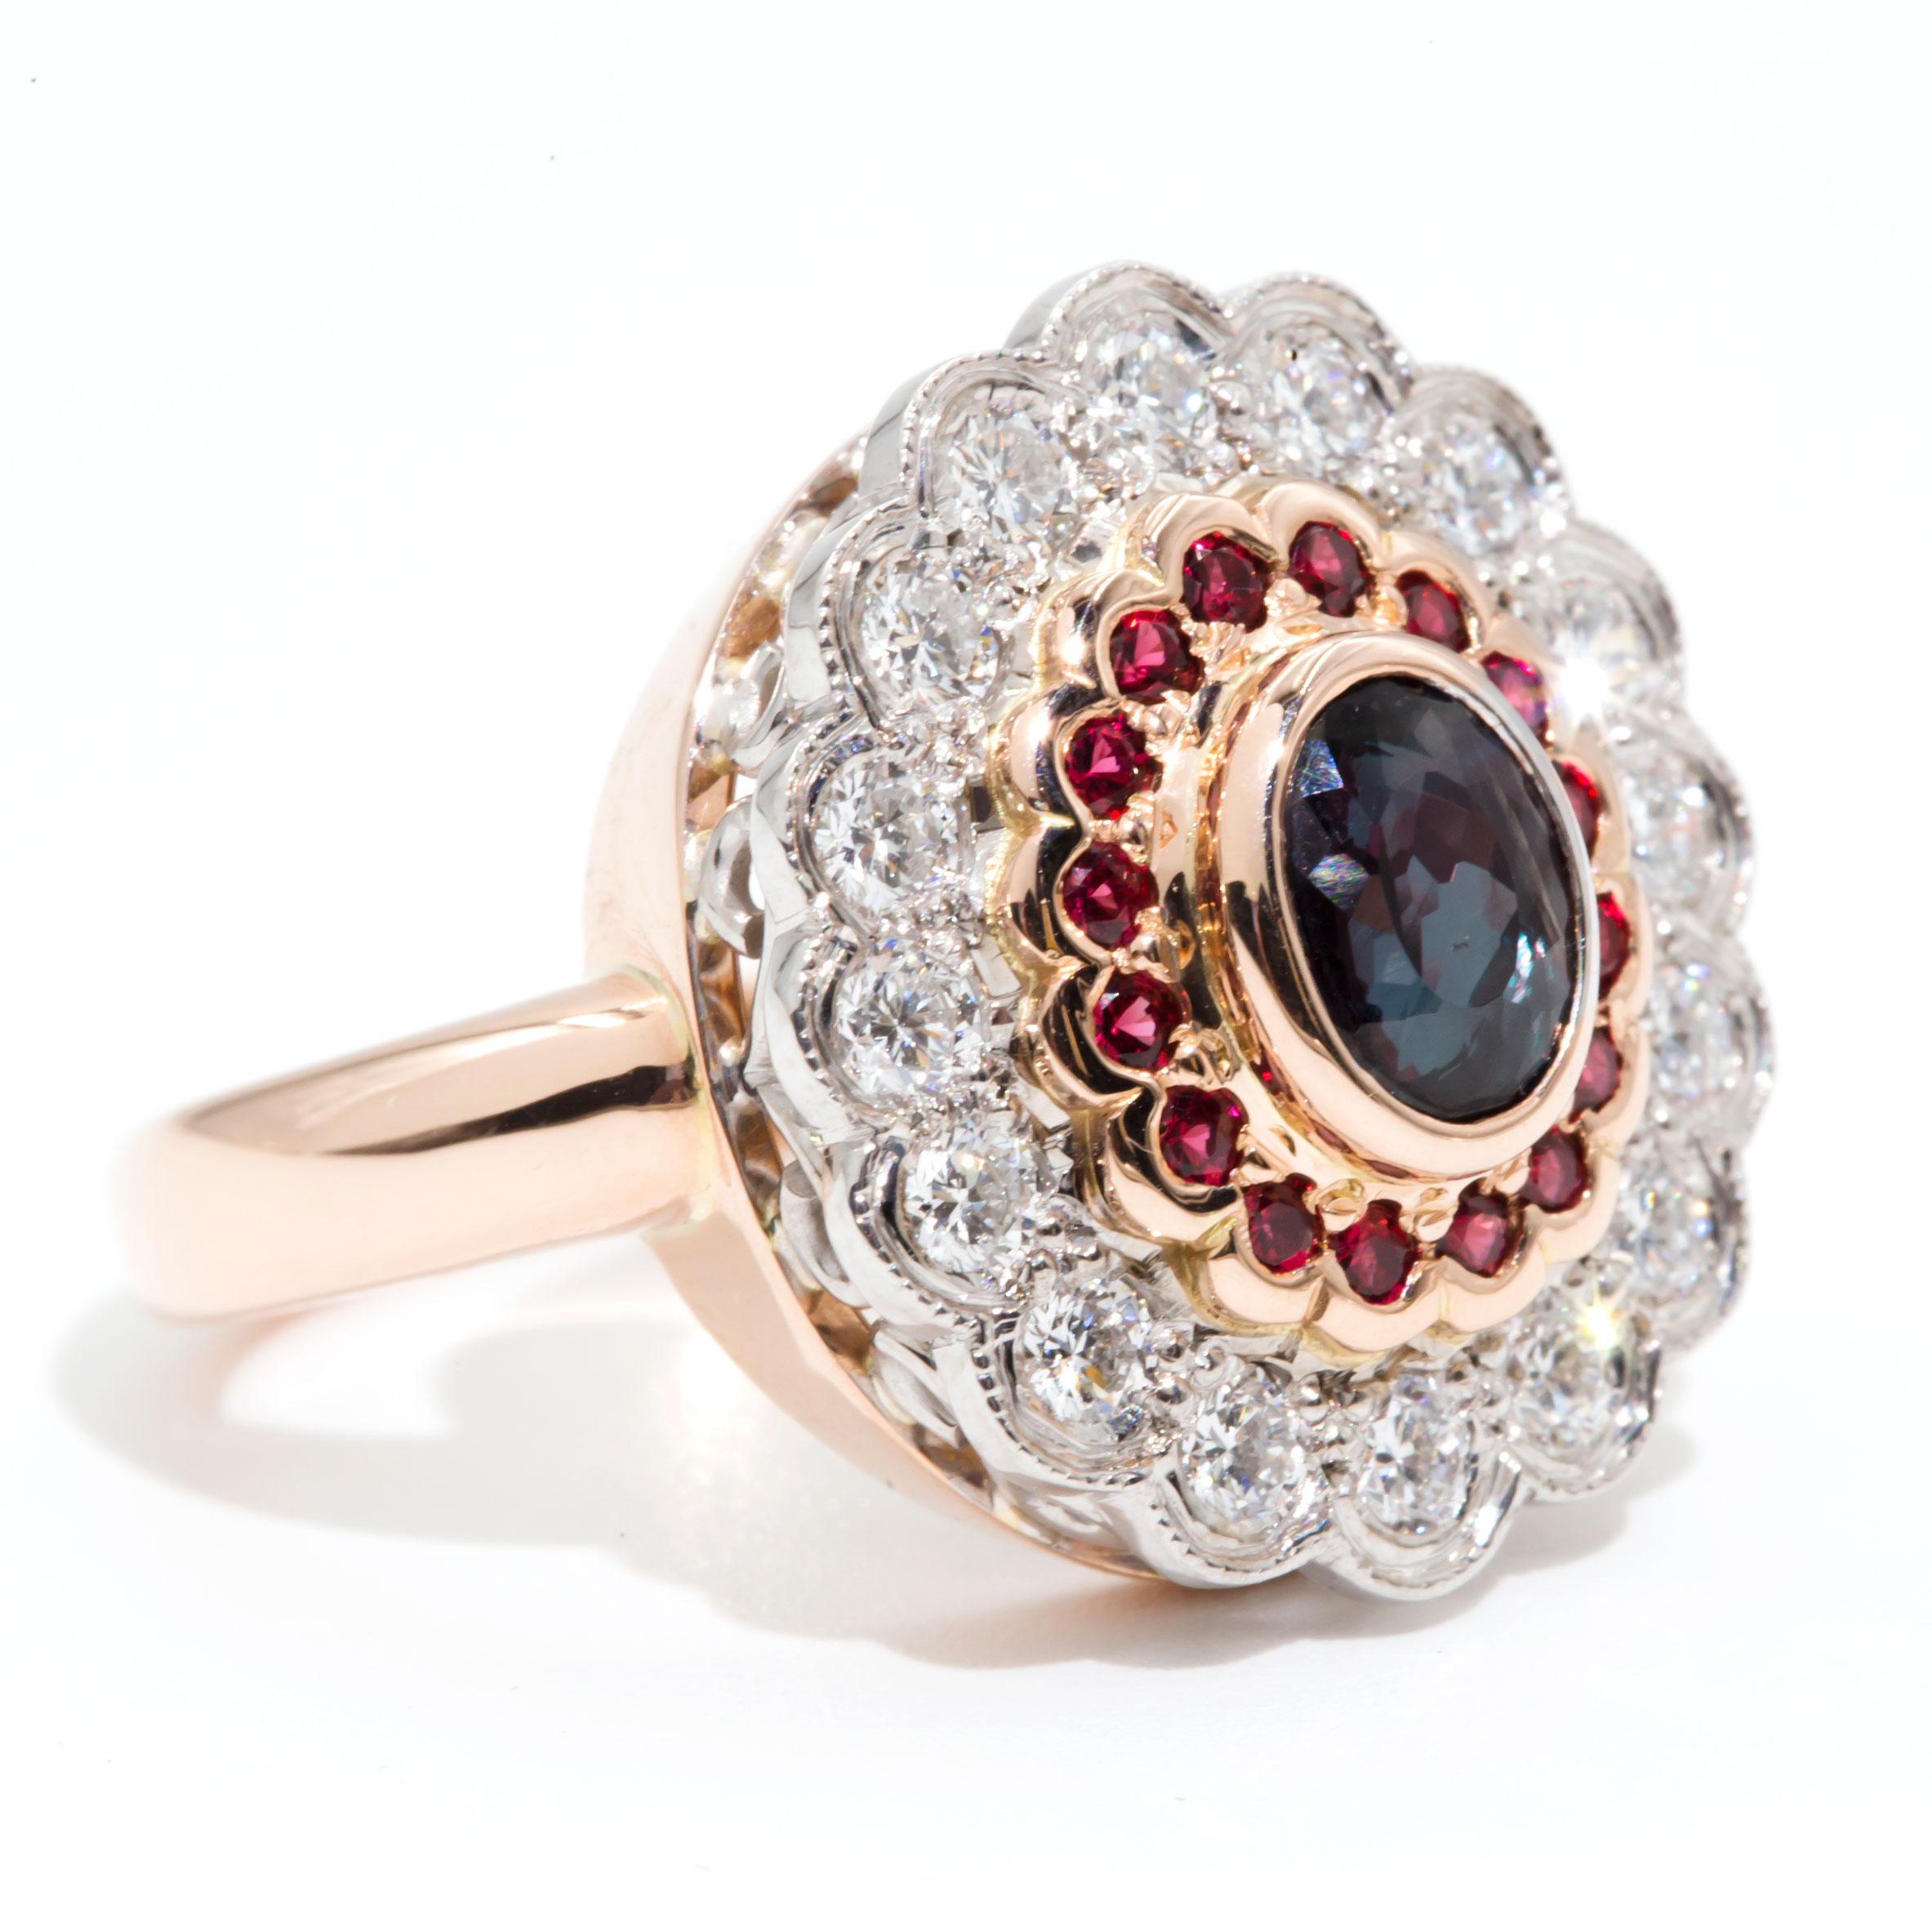 Carefully handmade and crafted in 18 carat rose and white gold, this alluring one-of-a-kind halo cluster vintage ring features a stunning and rare 1.24 carat oval Alexandrite and is beset with a doubled scalloped border of sixteen bright red spinel